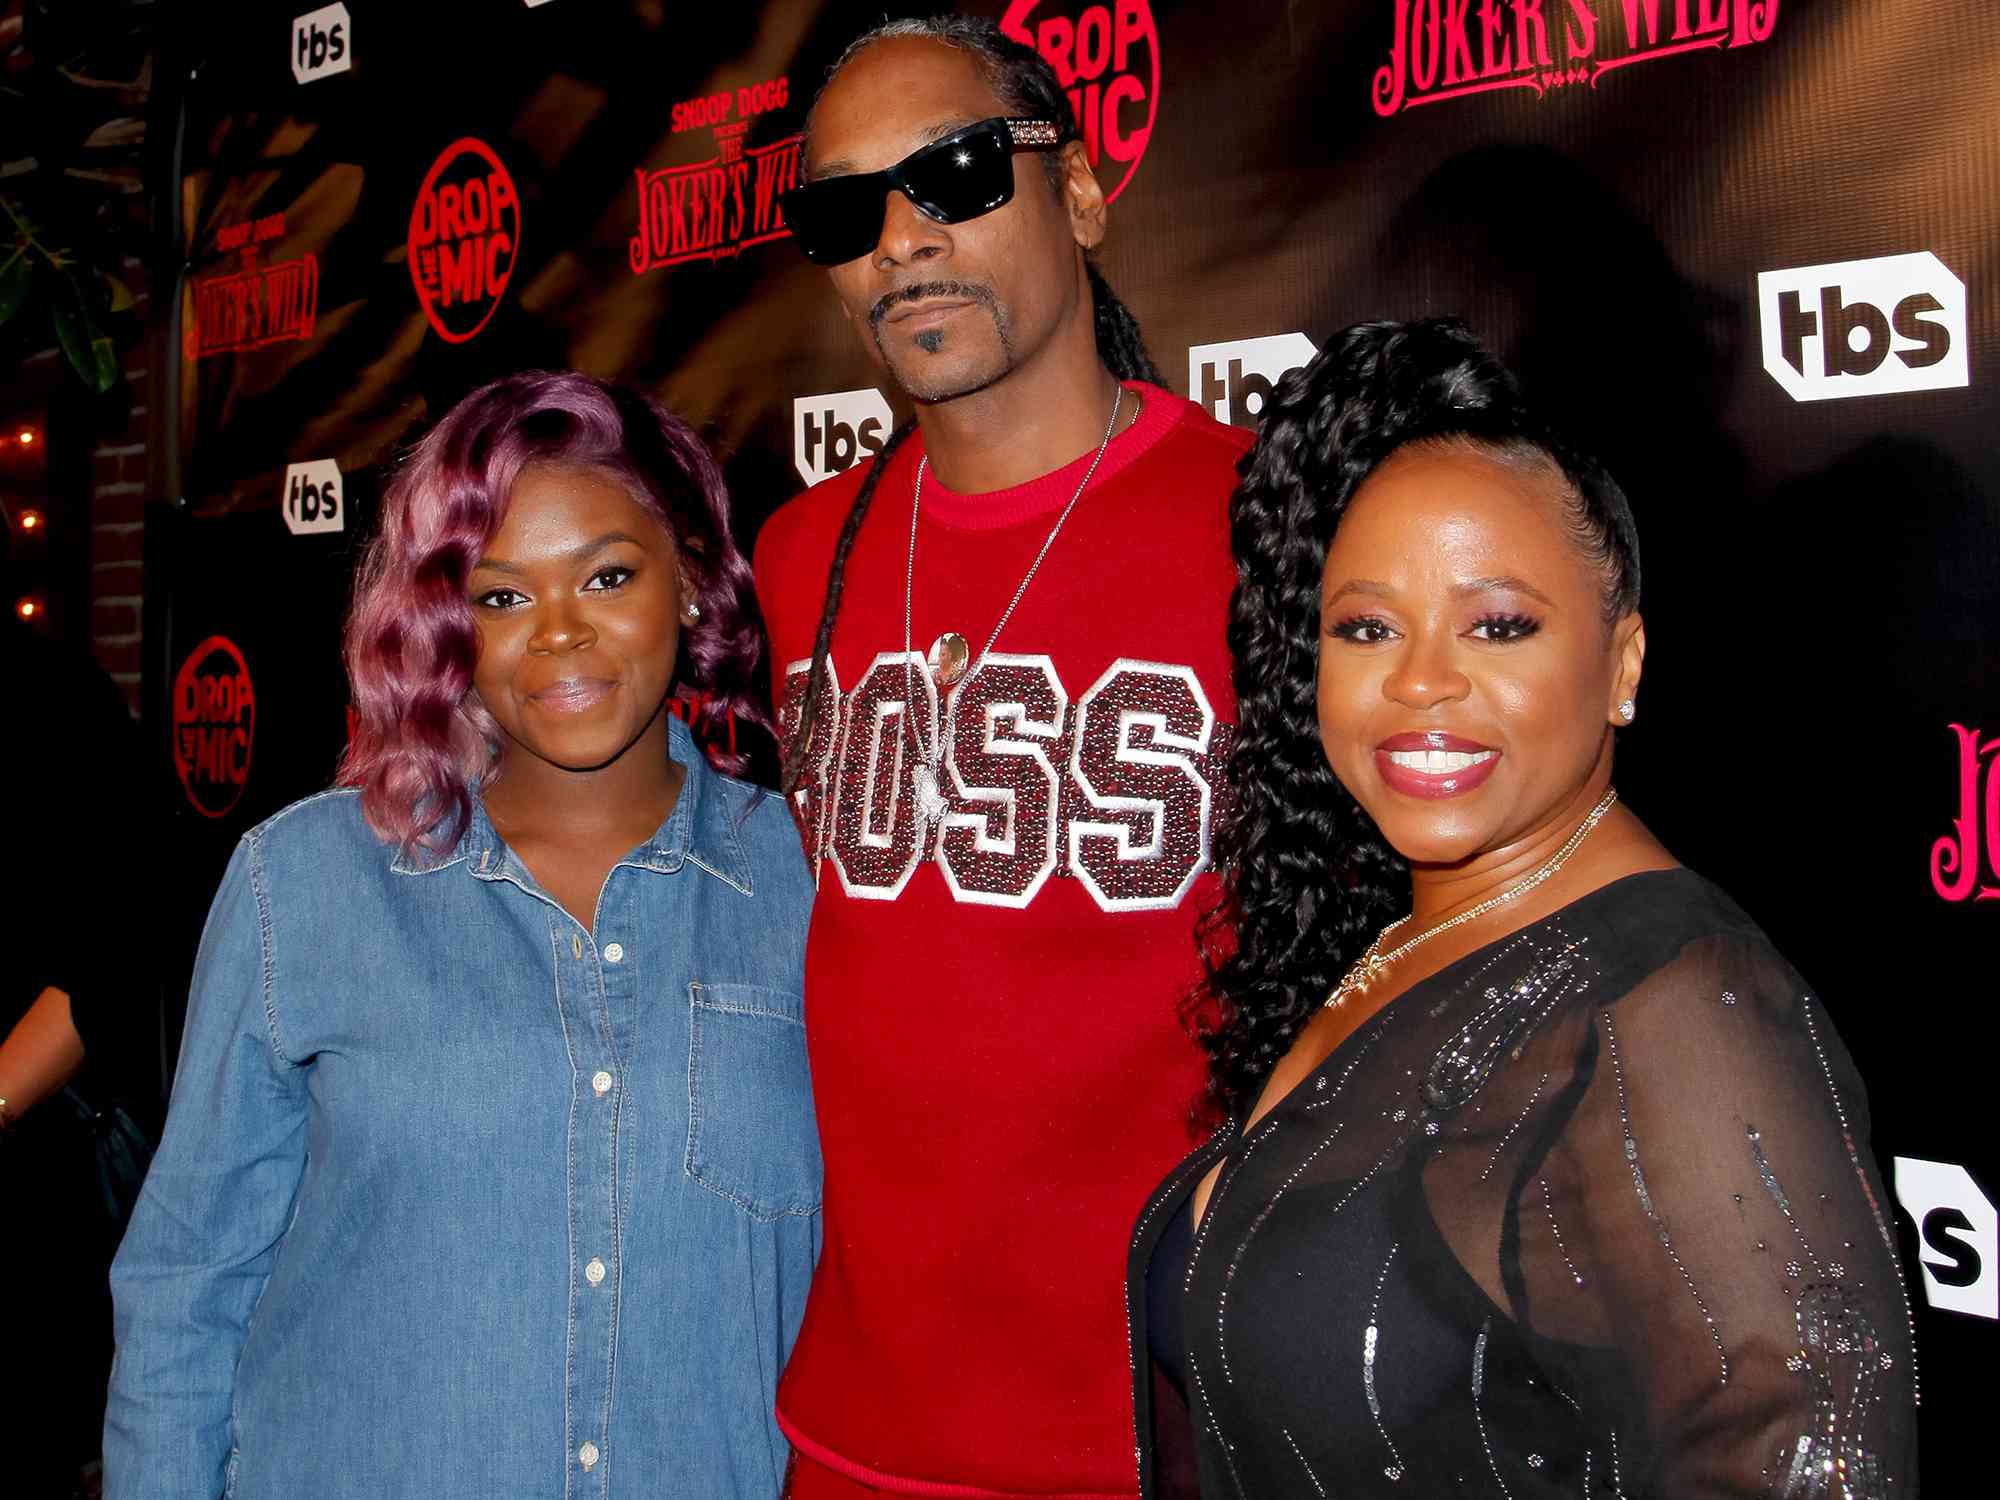 Cori Broadus, Snoop Dogg and Shante Broadus attend the premiere for TBS's 'Drop The Mic' and 'The Joker's Wild' on October 11, 2017 in Los Angeles, California. 